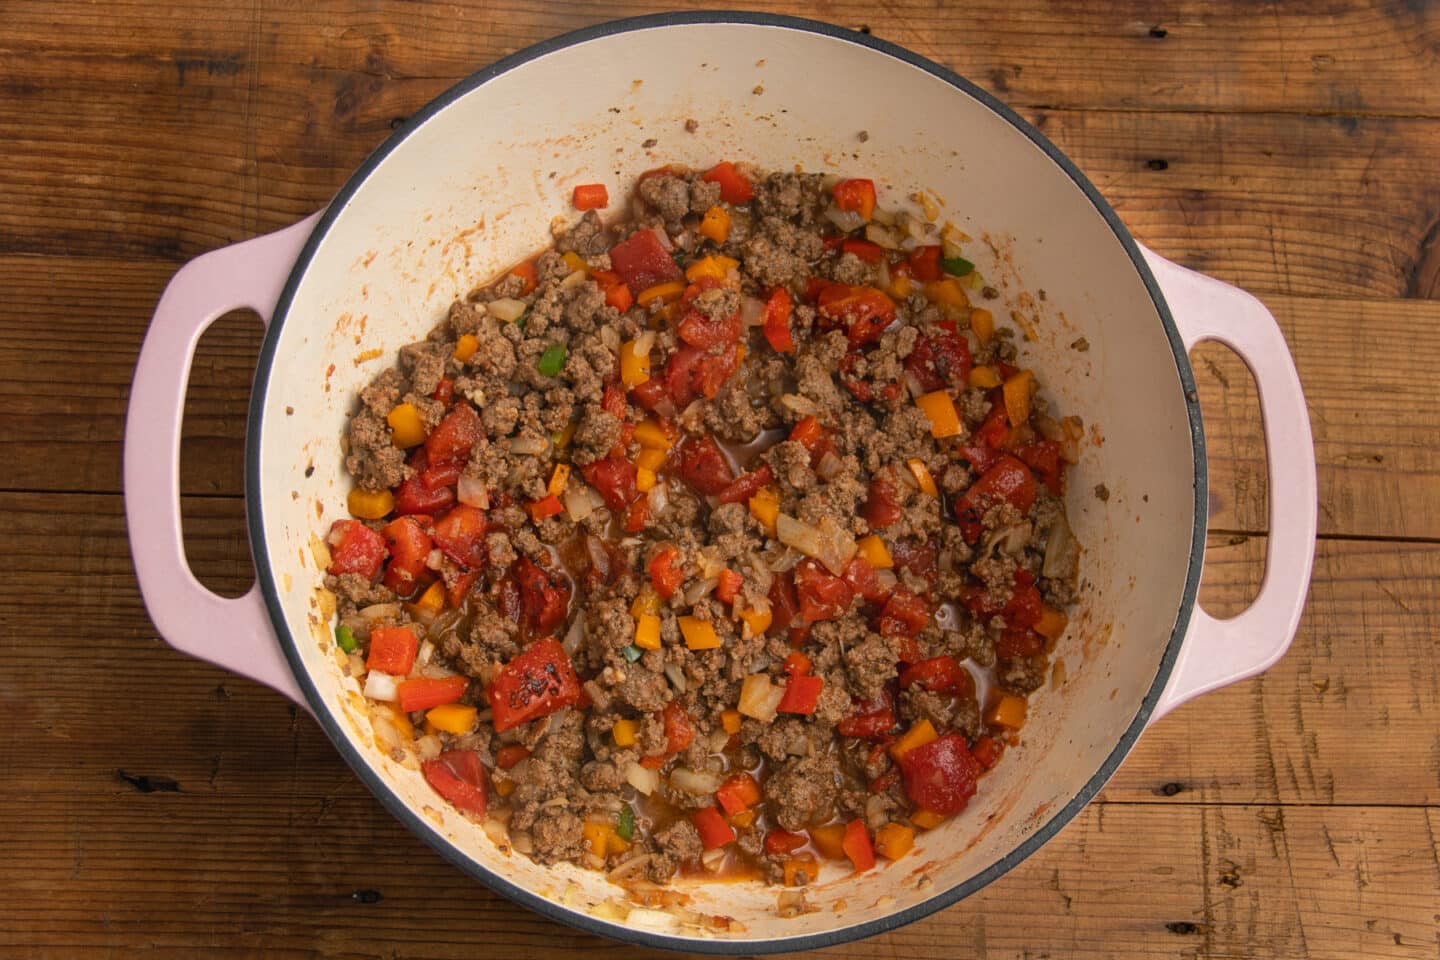 This is a picture of the pot with tomatoes added to the veggies and the beef.